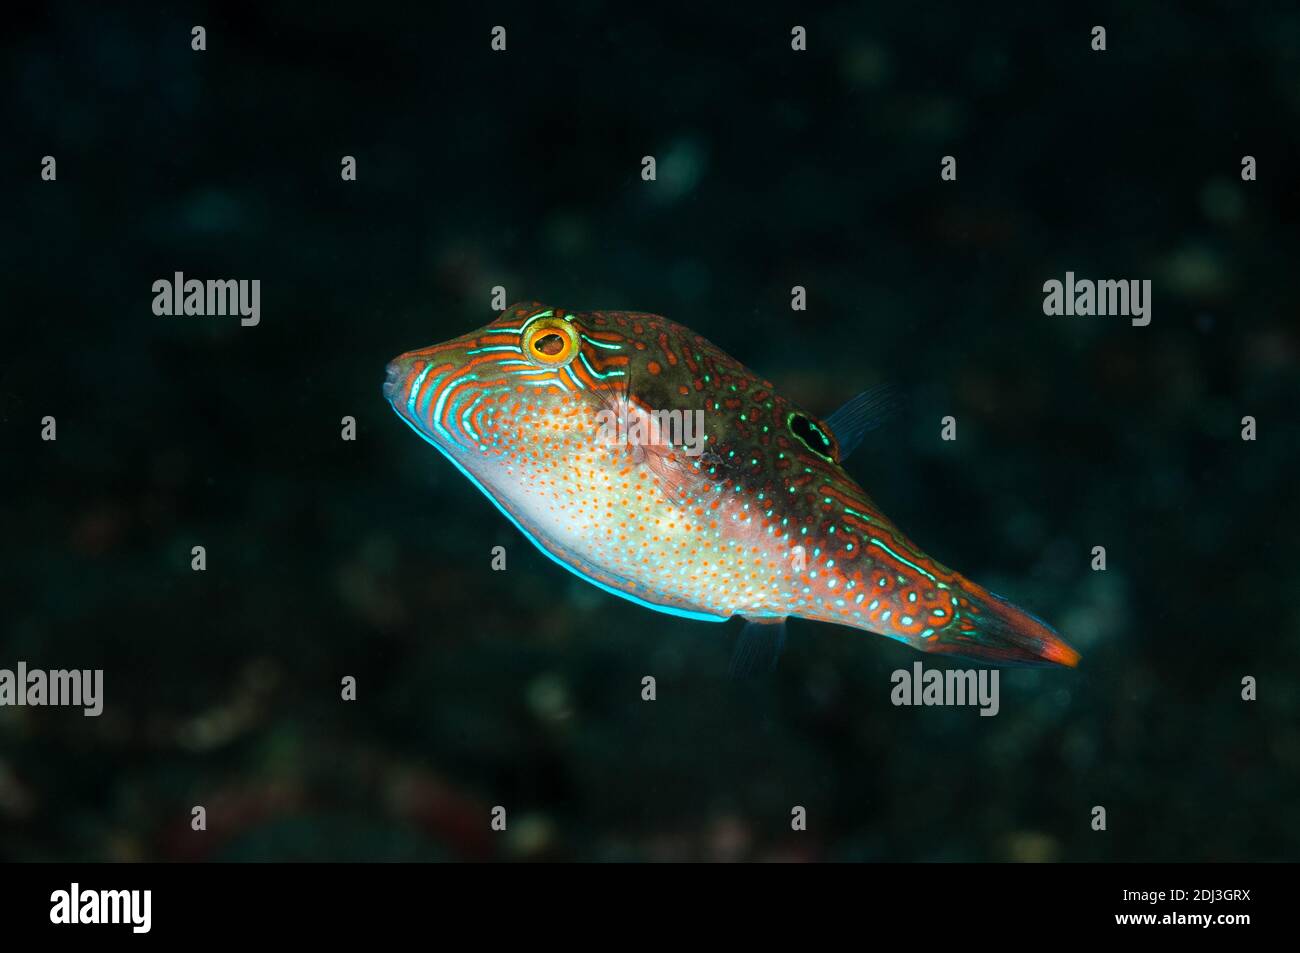 Papuan Toby, Canthigaster papua, Tulamben, Bali, Indonesia Foto Stock